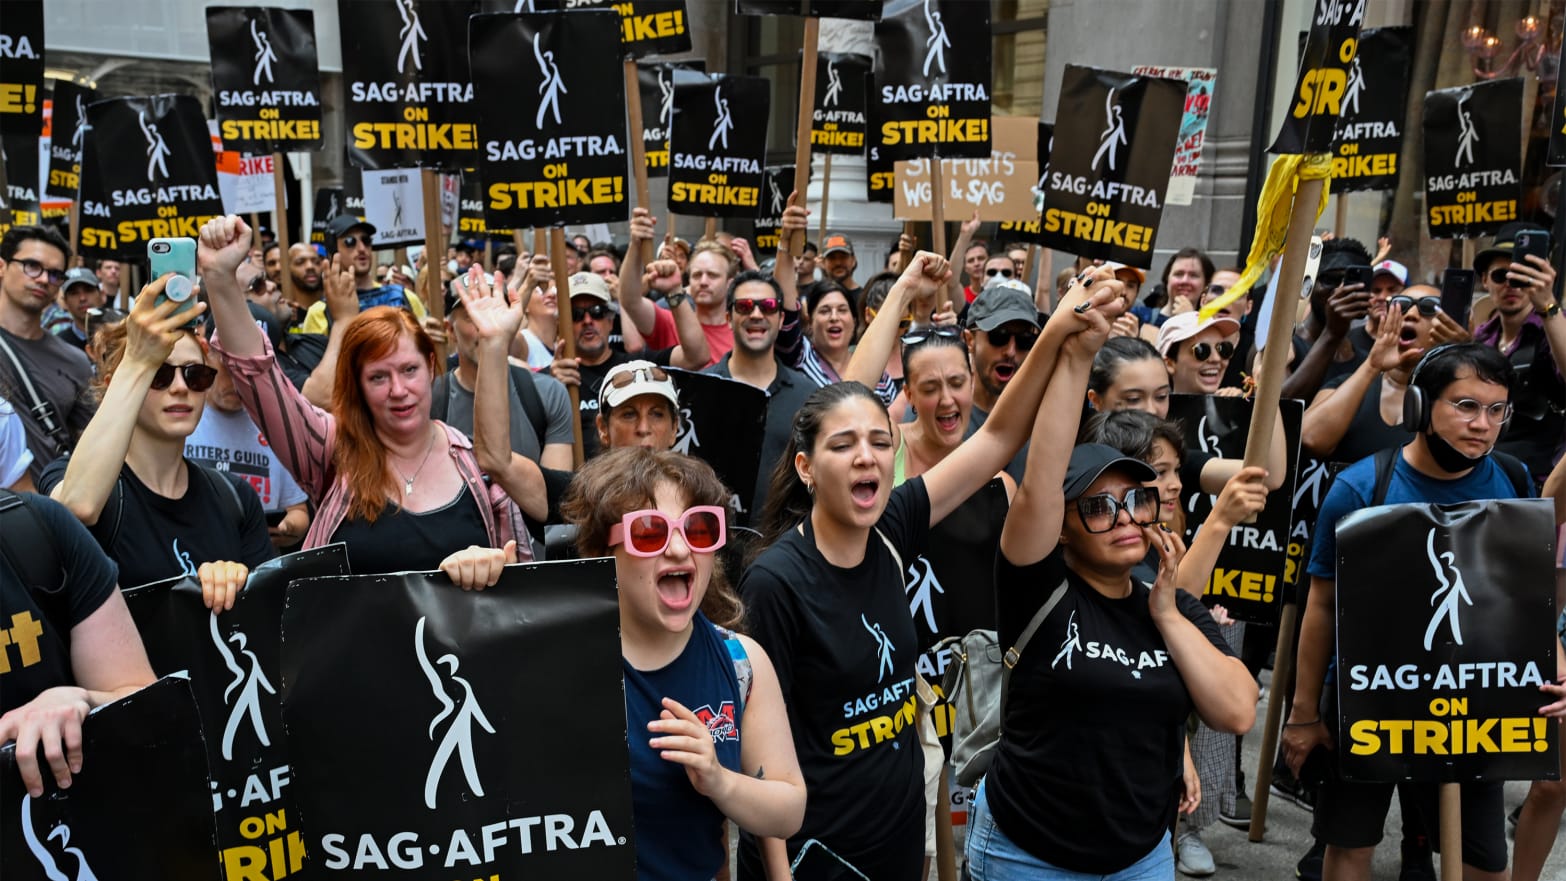 Members of the Writers Guild of America East and SAG-AFTRA cheer and react as they walk the picket line outside Netflix.